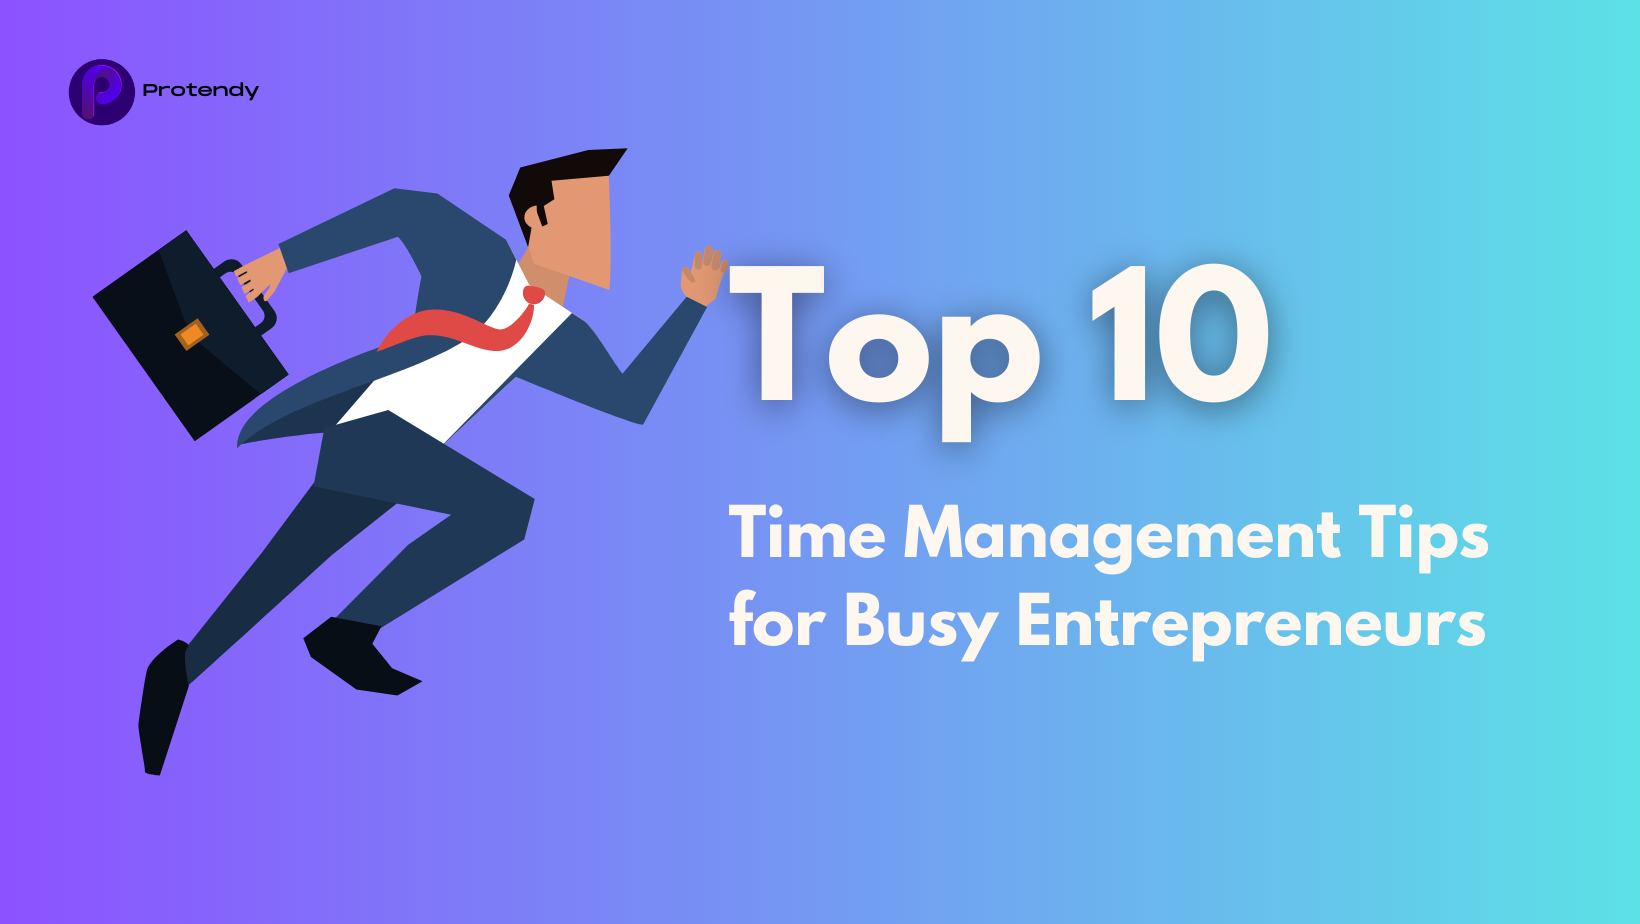 Top 10 Time Management Tips for Busy Entrepreneurs